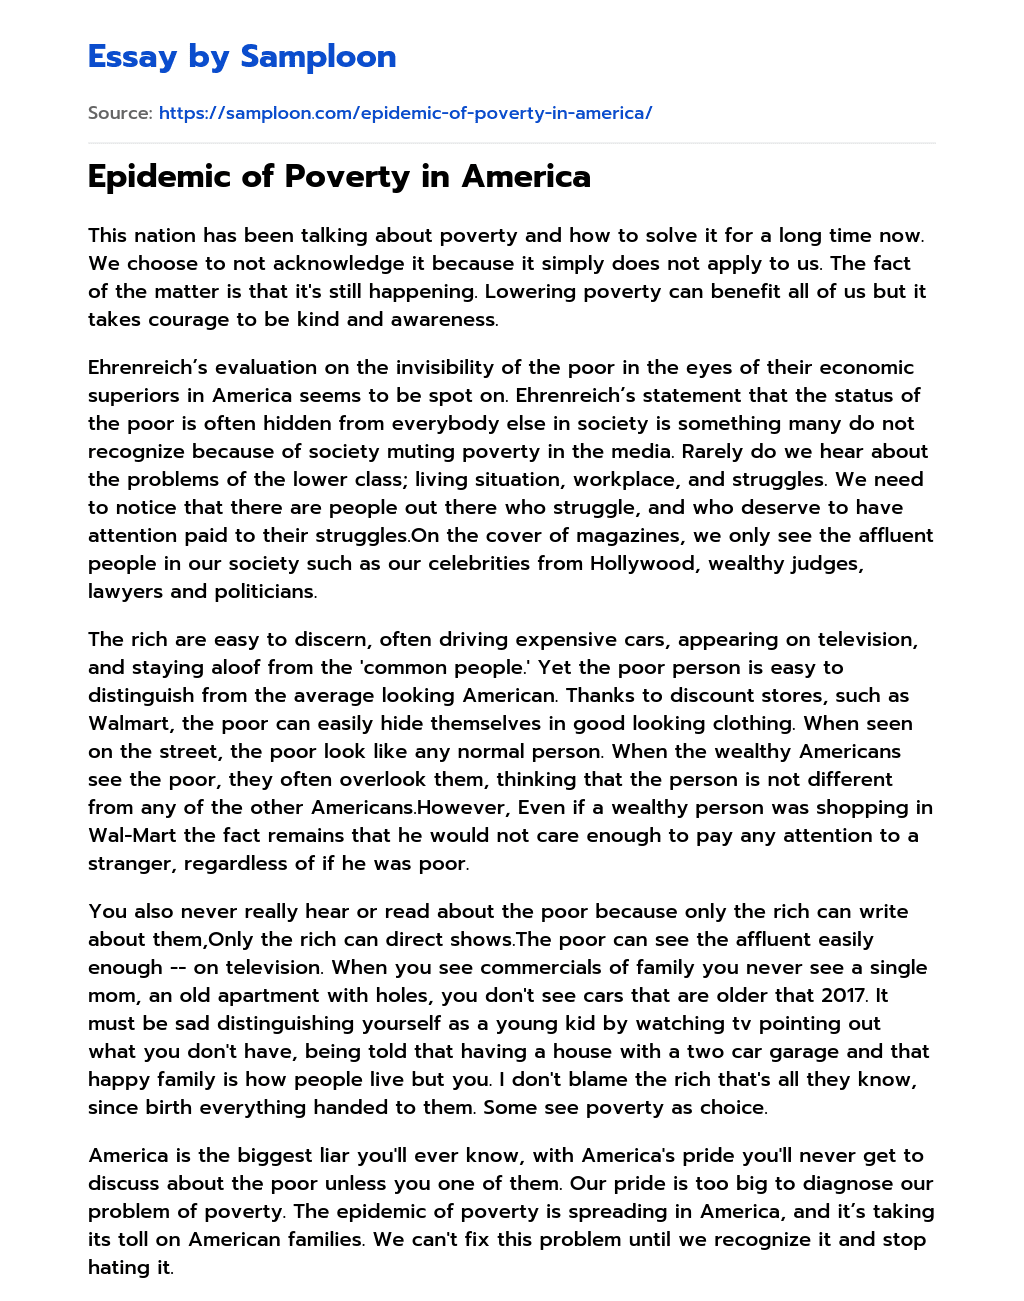 Epidemic of Poverty in America essay